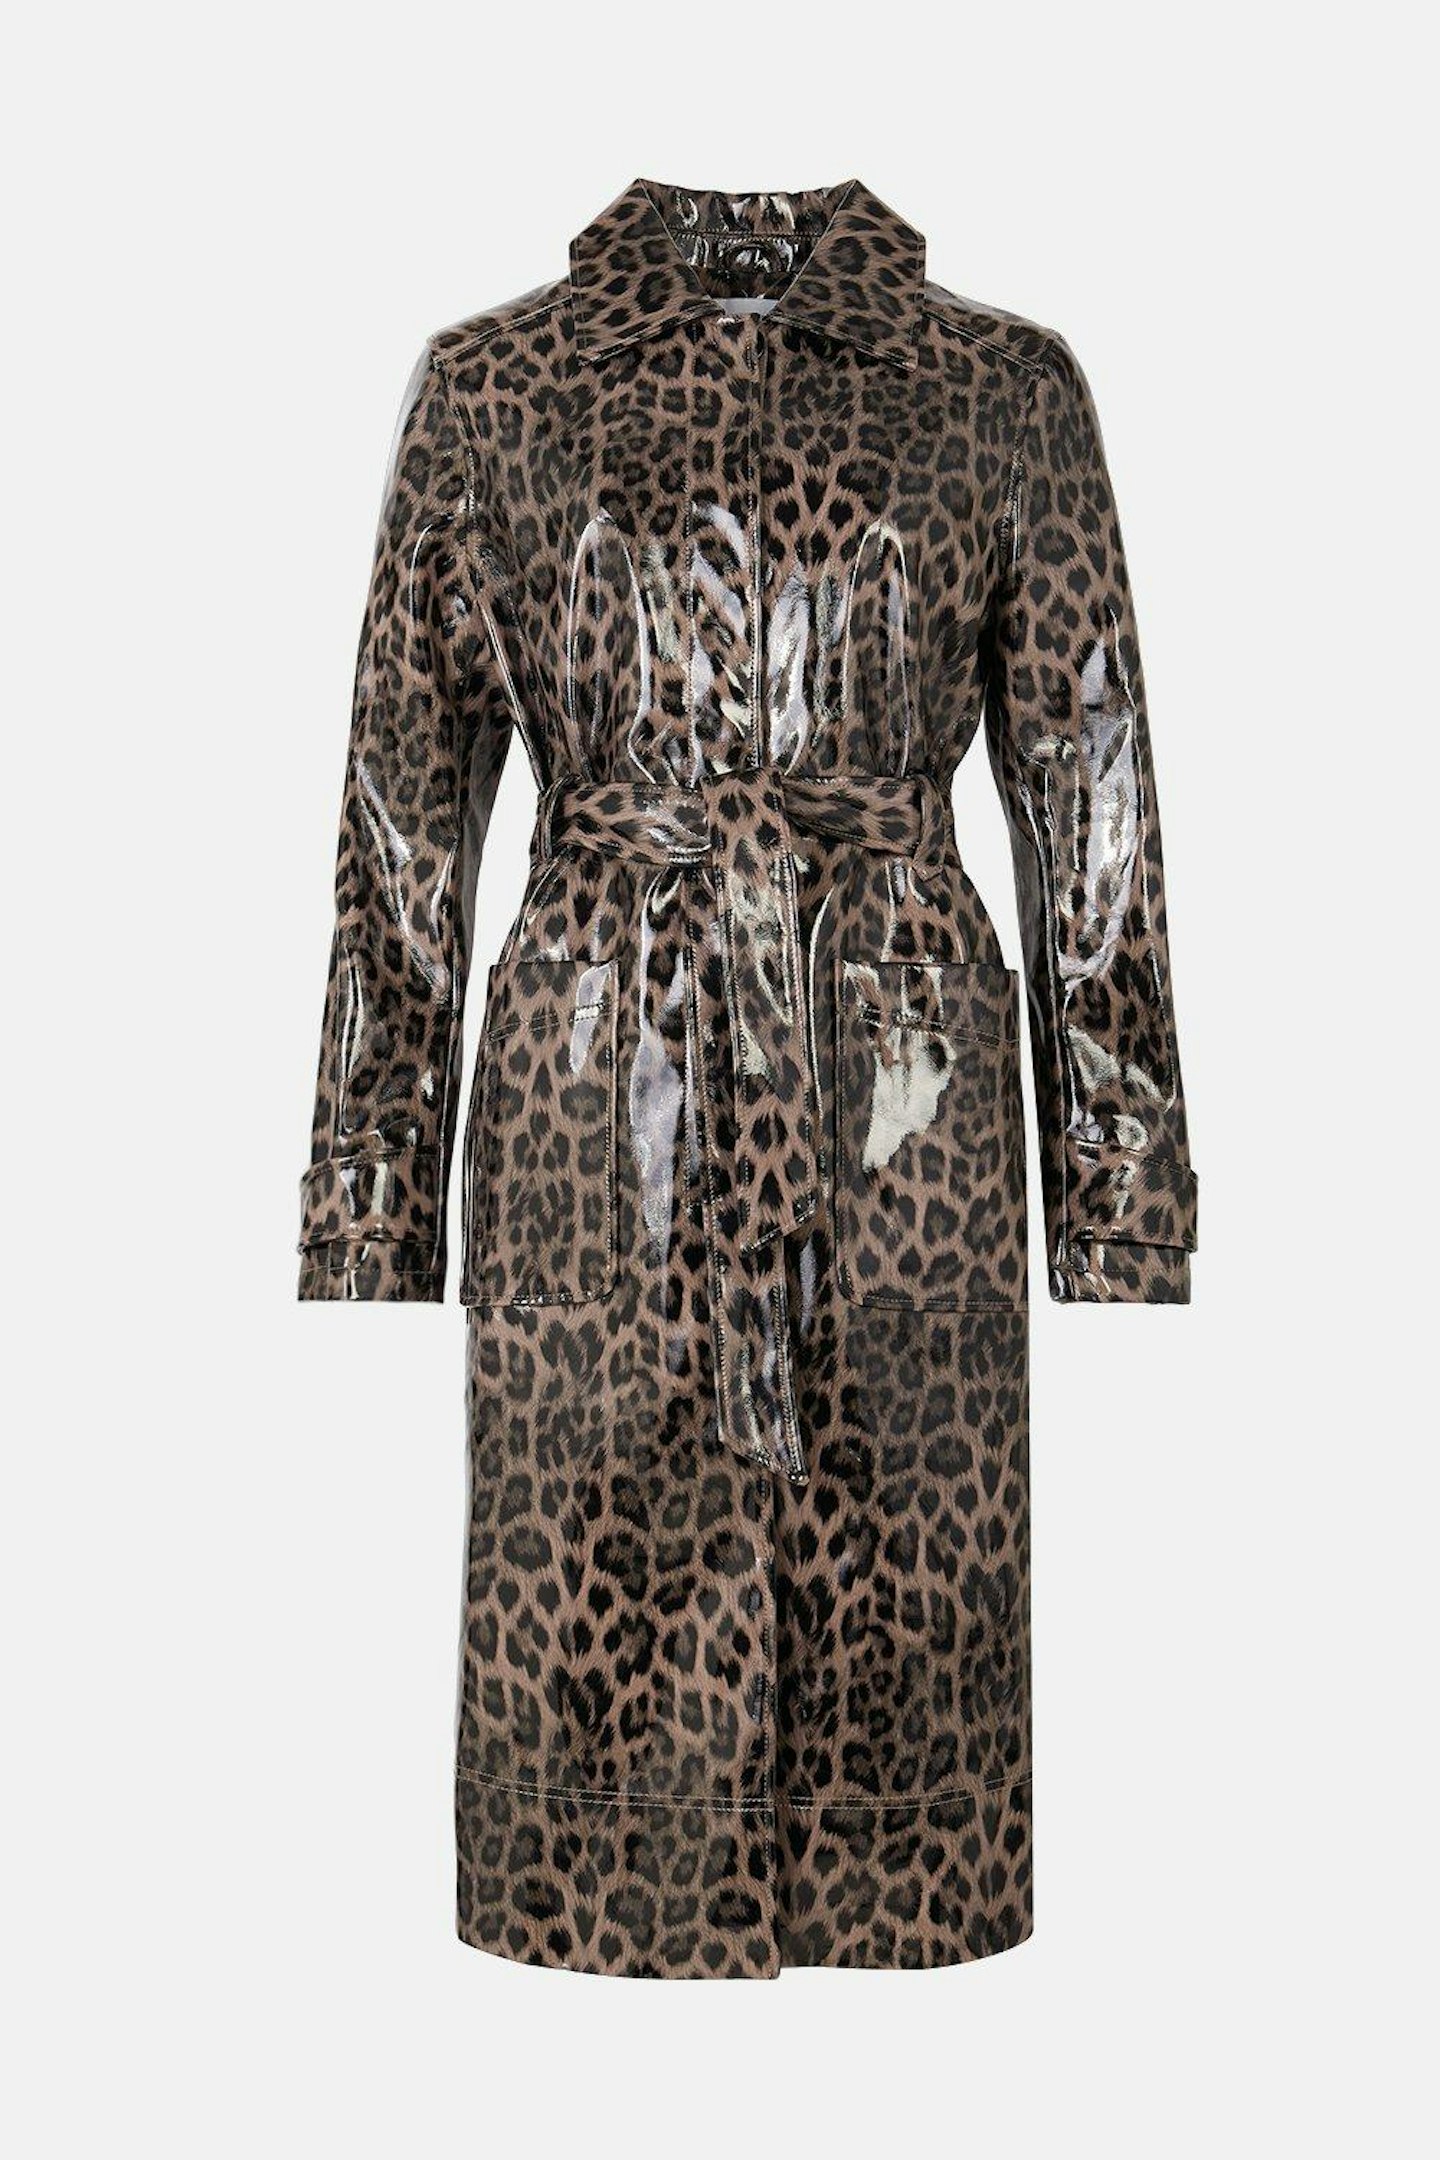 Warehouse, Faux-Leather Patent Leopard Trench Coat, £103.20